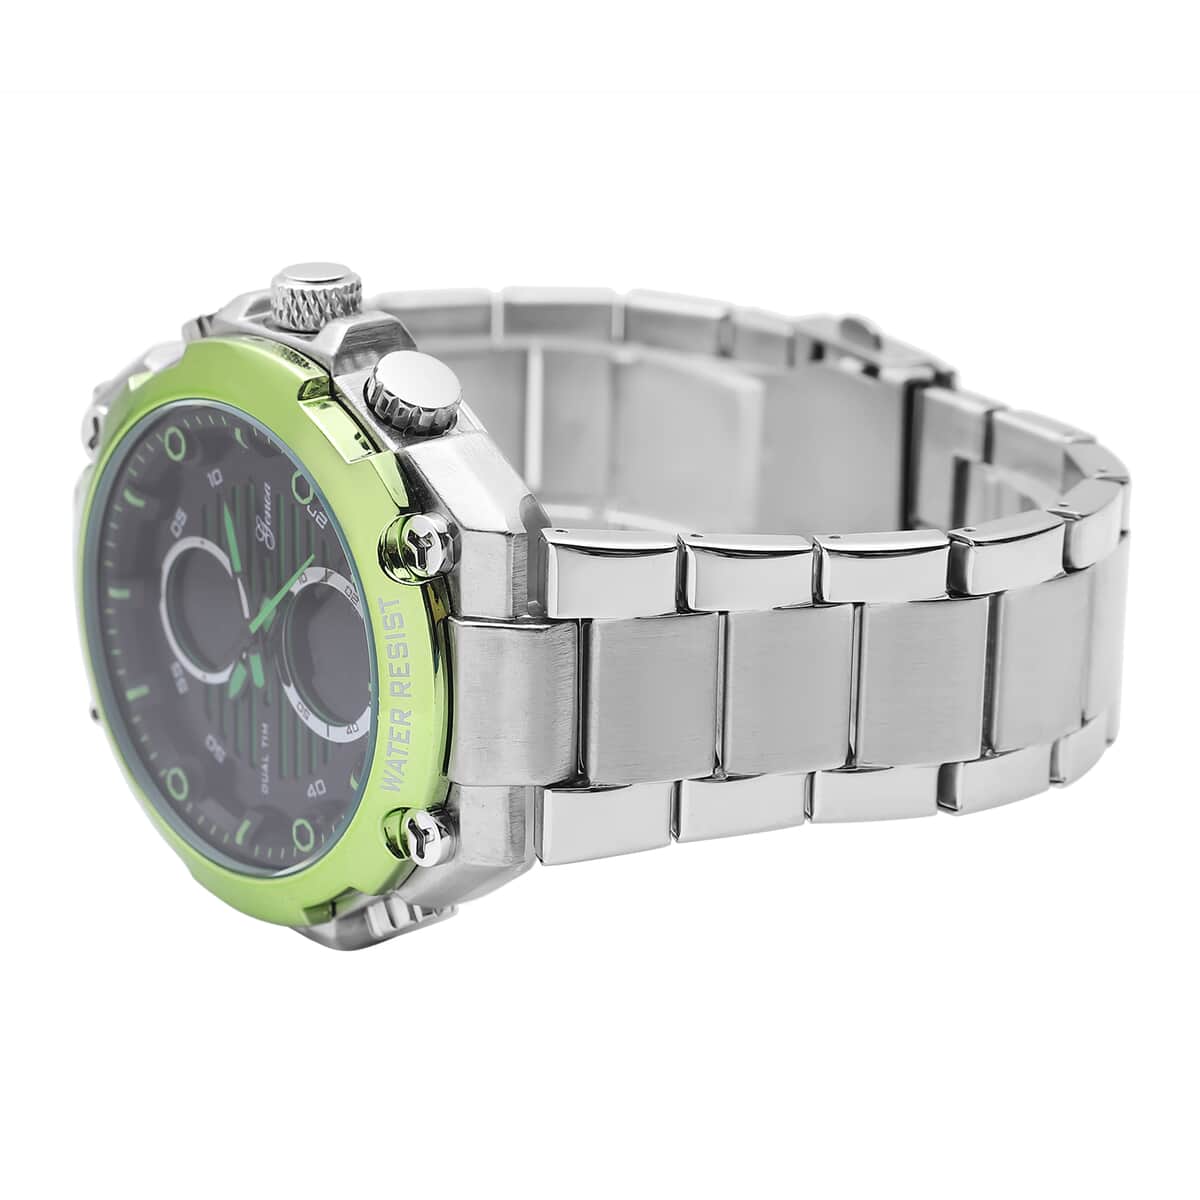 Genoa Japanese and Electronic Movement Multifunctional Key Green Dial Watch in Stainless Steel Strap image number 4